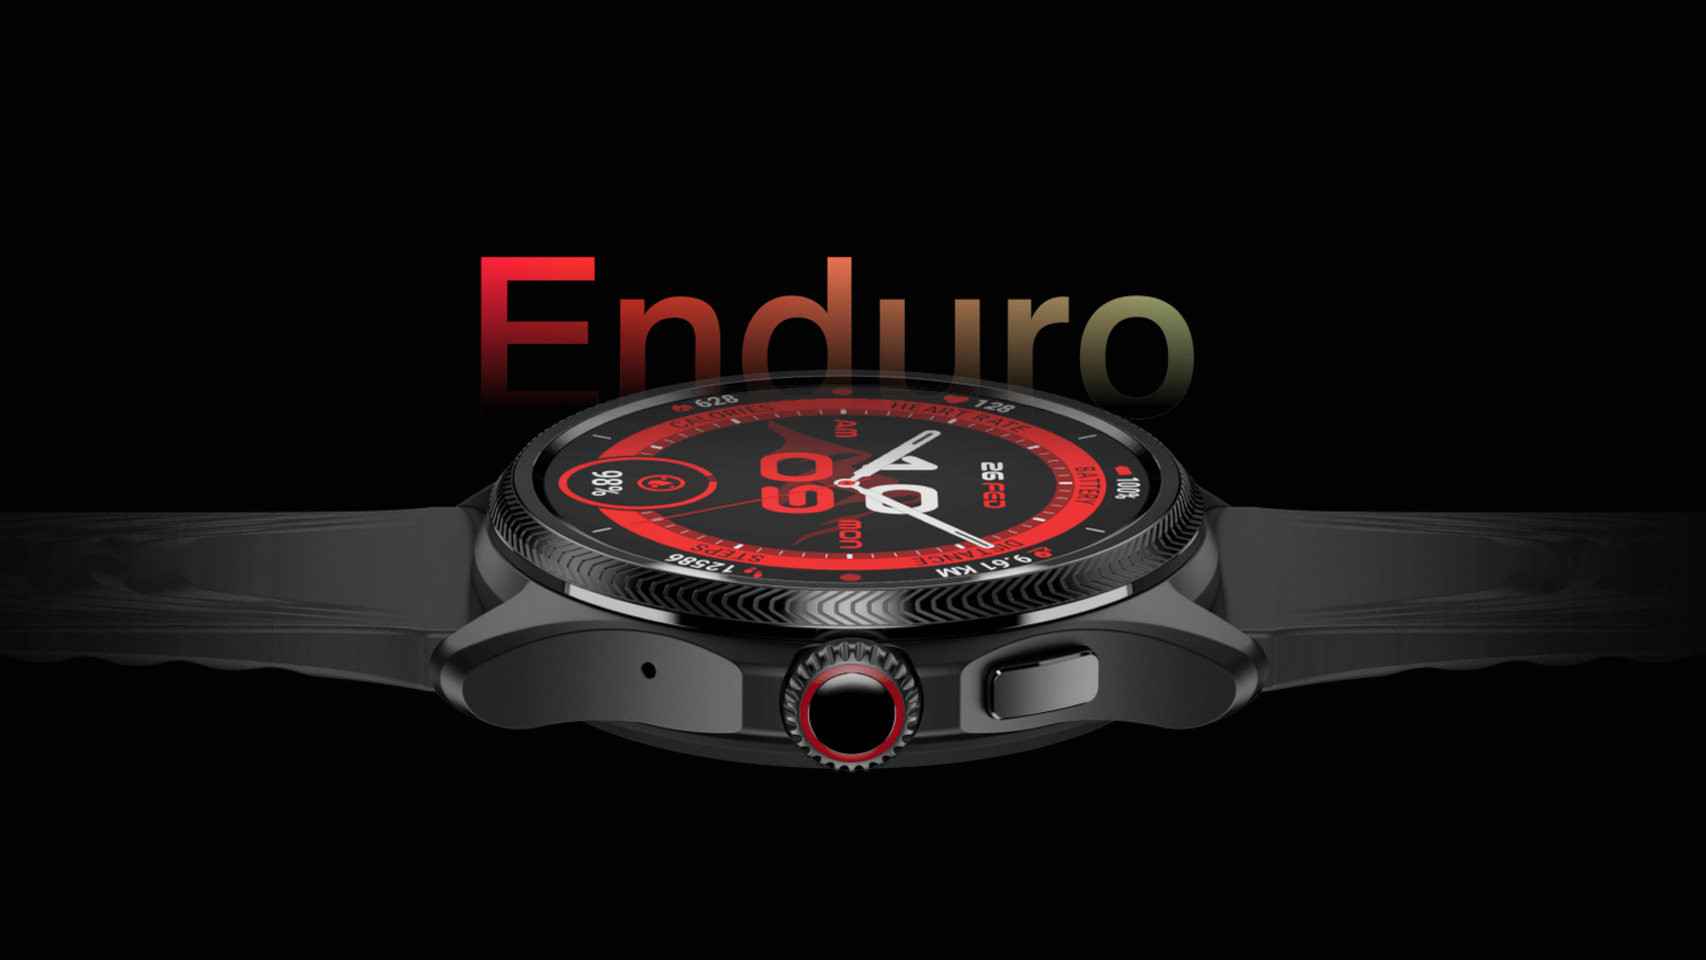 The Ultimate Wear OS Watch: Resistant Design and Long-lasting Battery Life Available in Spain